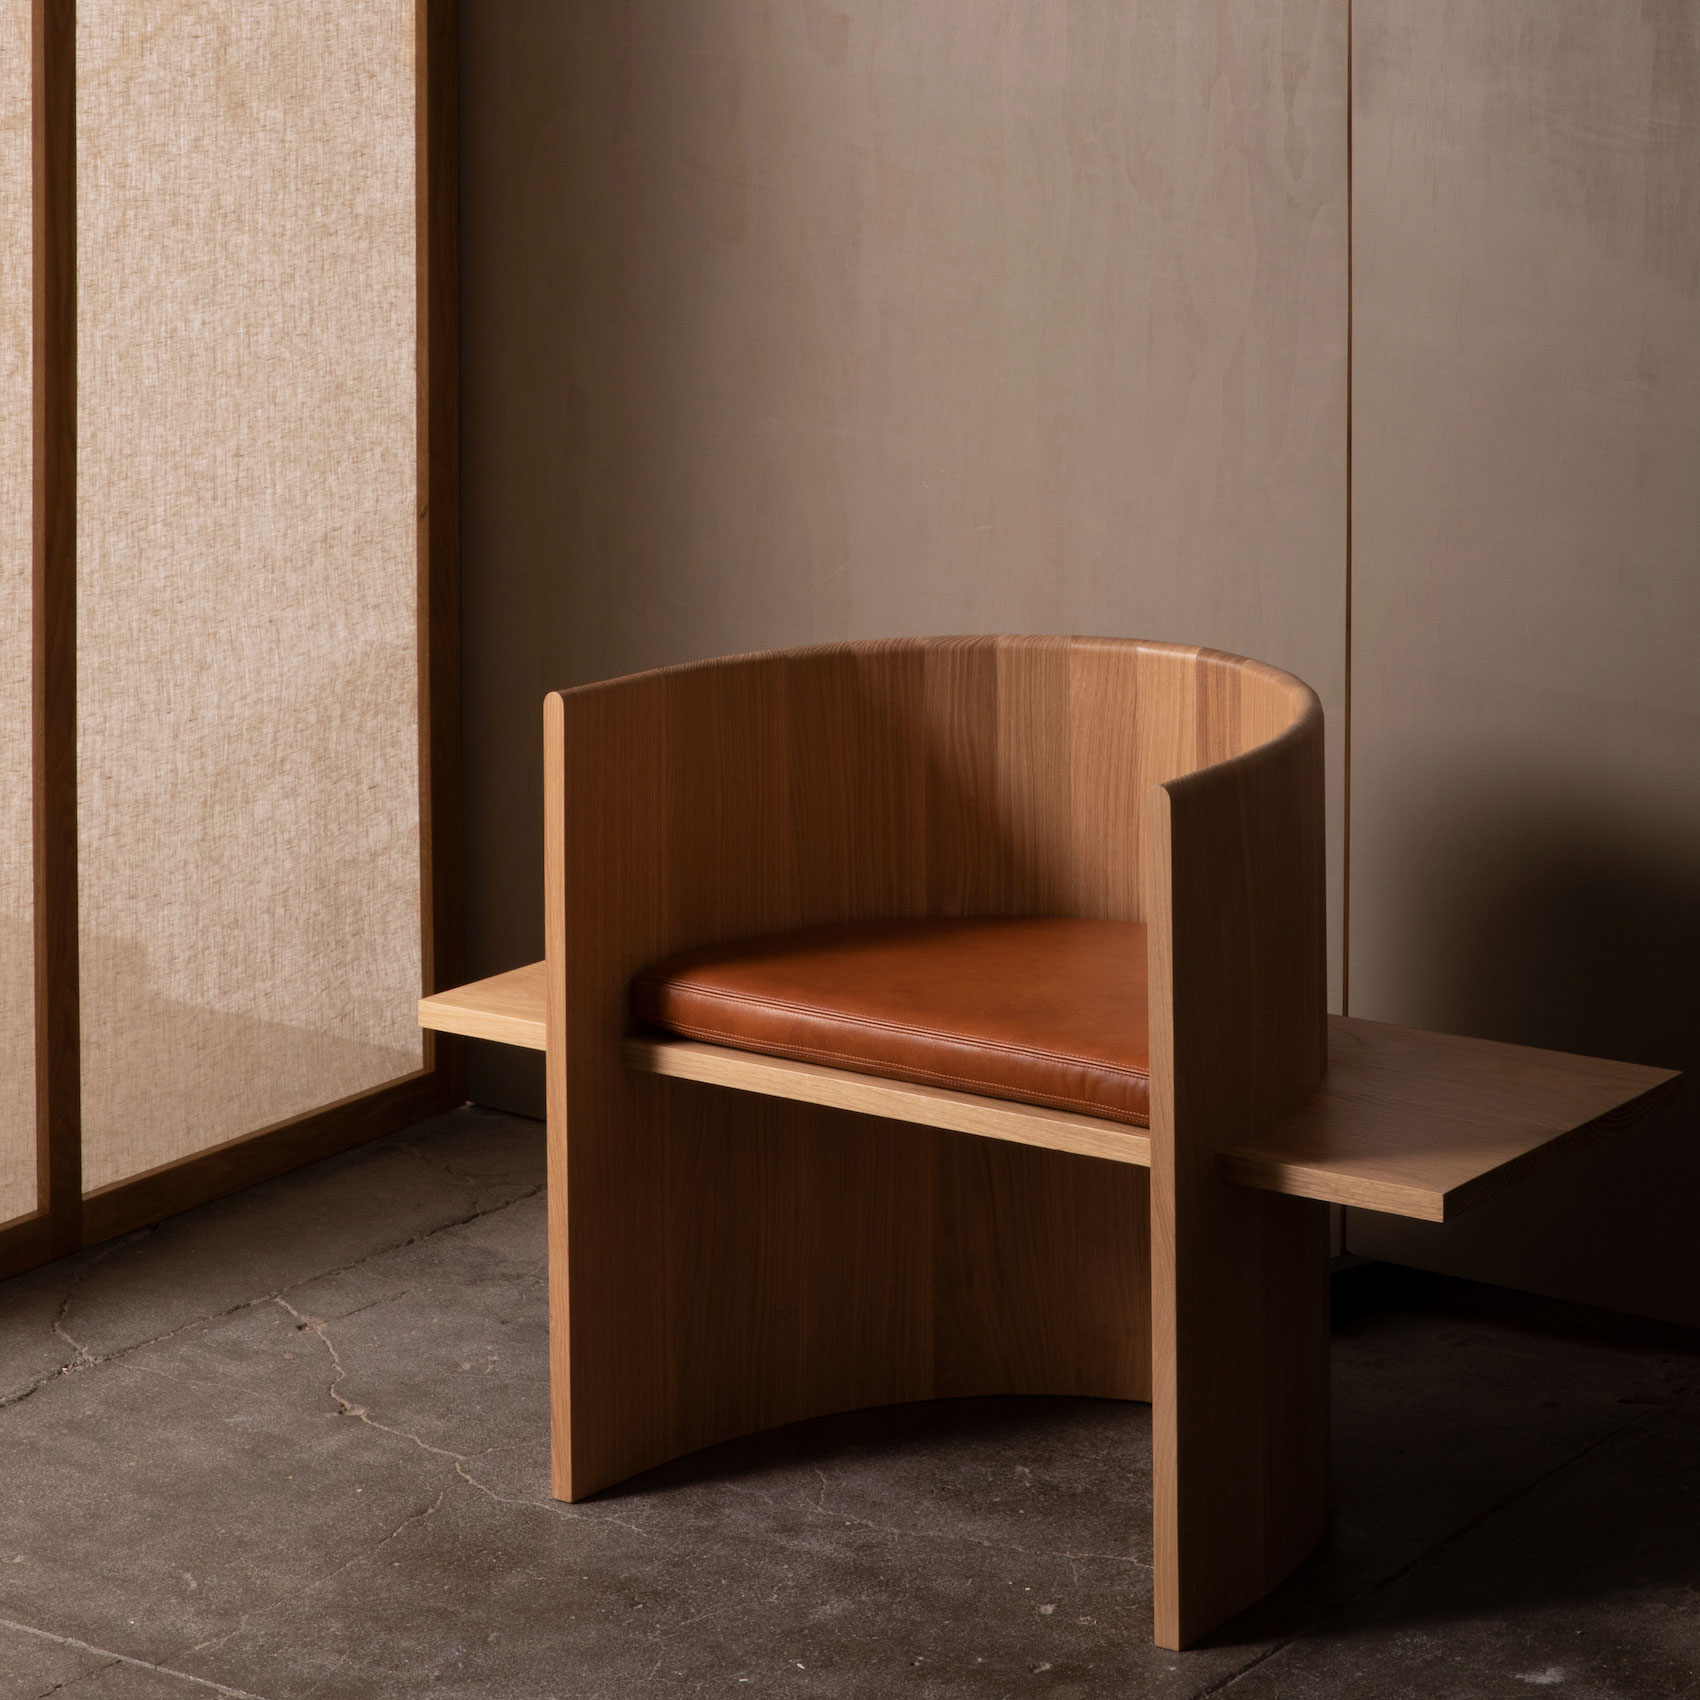 Minimalist Furniture Collection "One" by Campagna